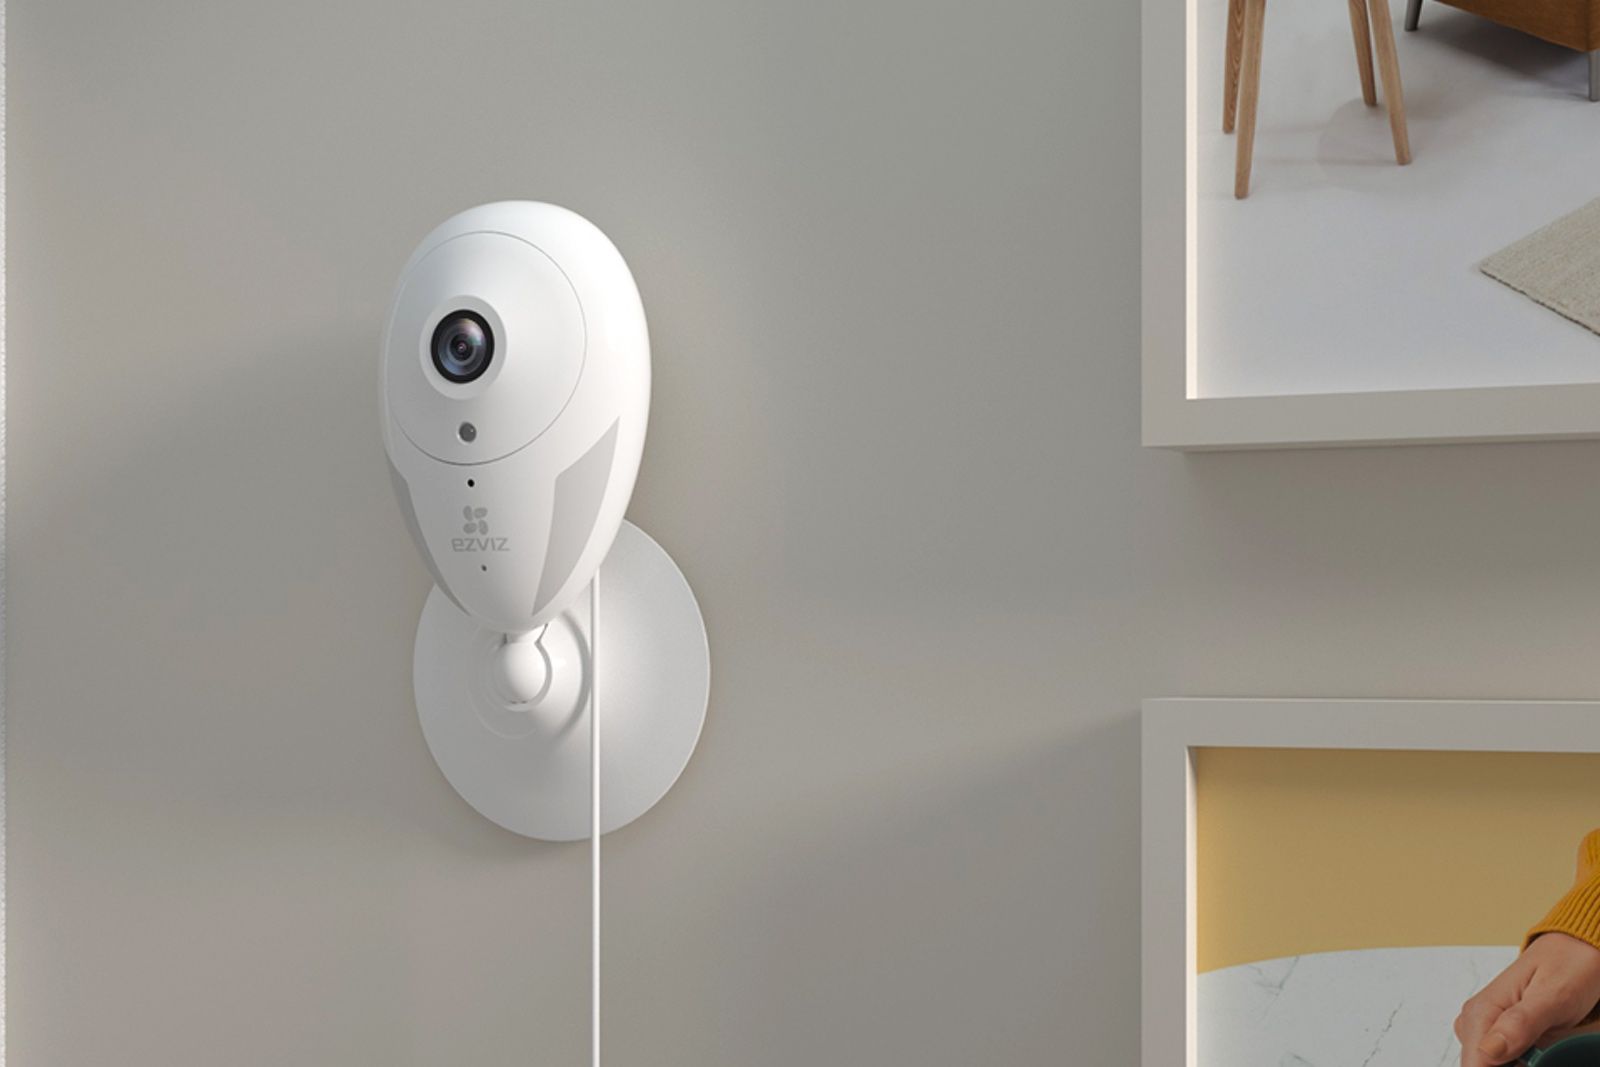 EZVIZ has some superb deals on smart home security for Prime Day photo 2